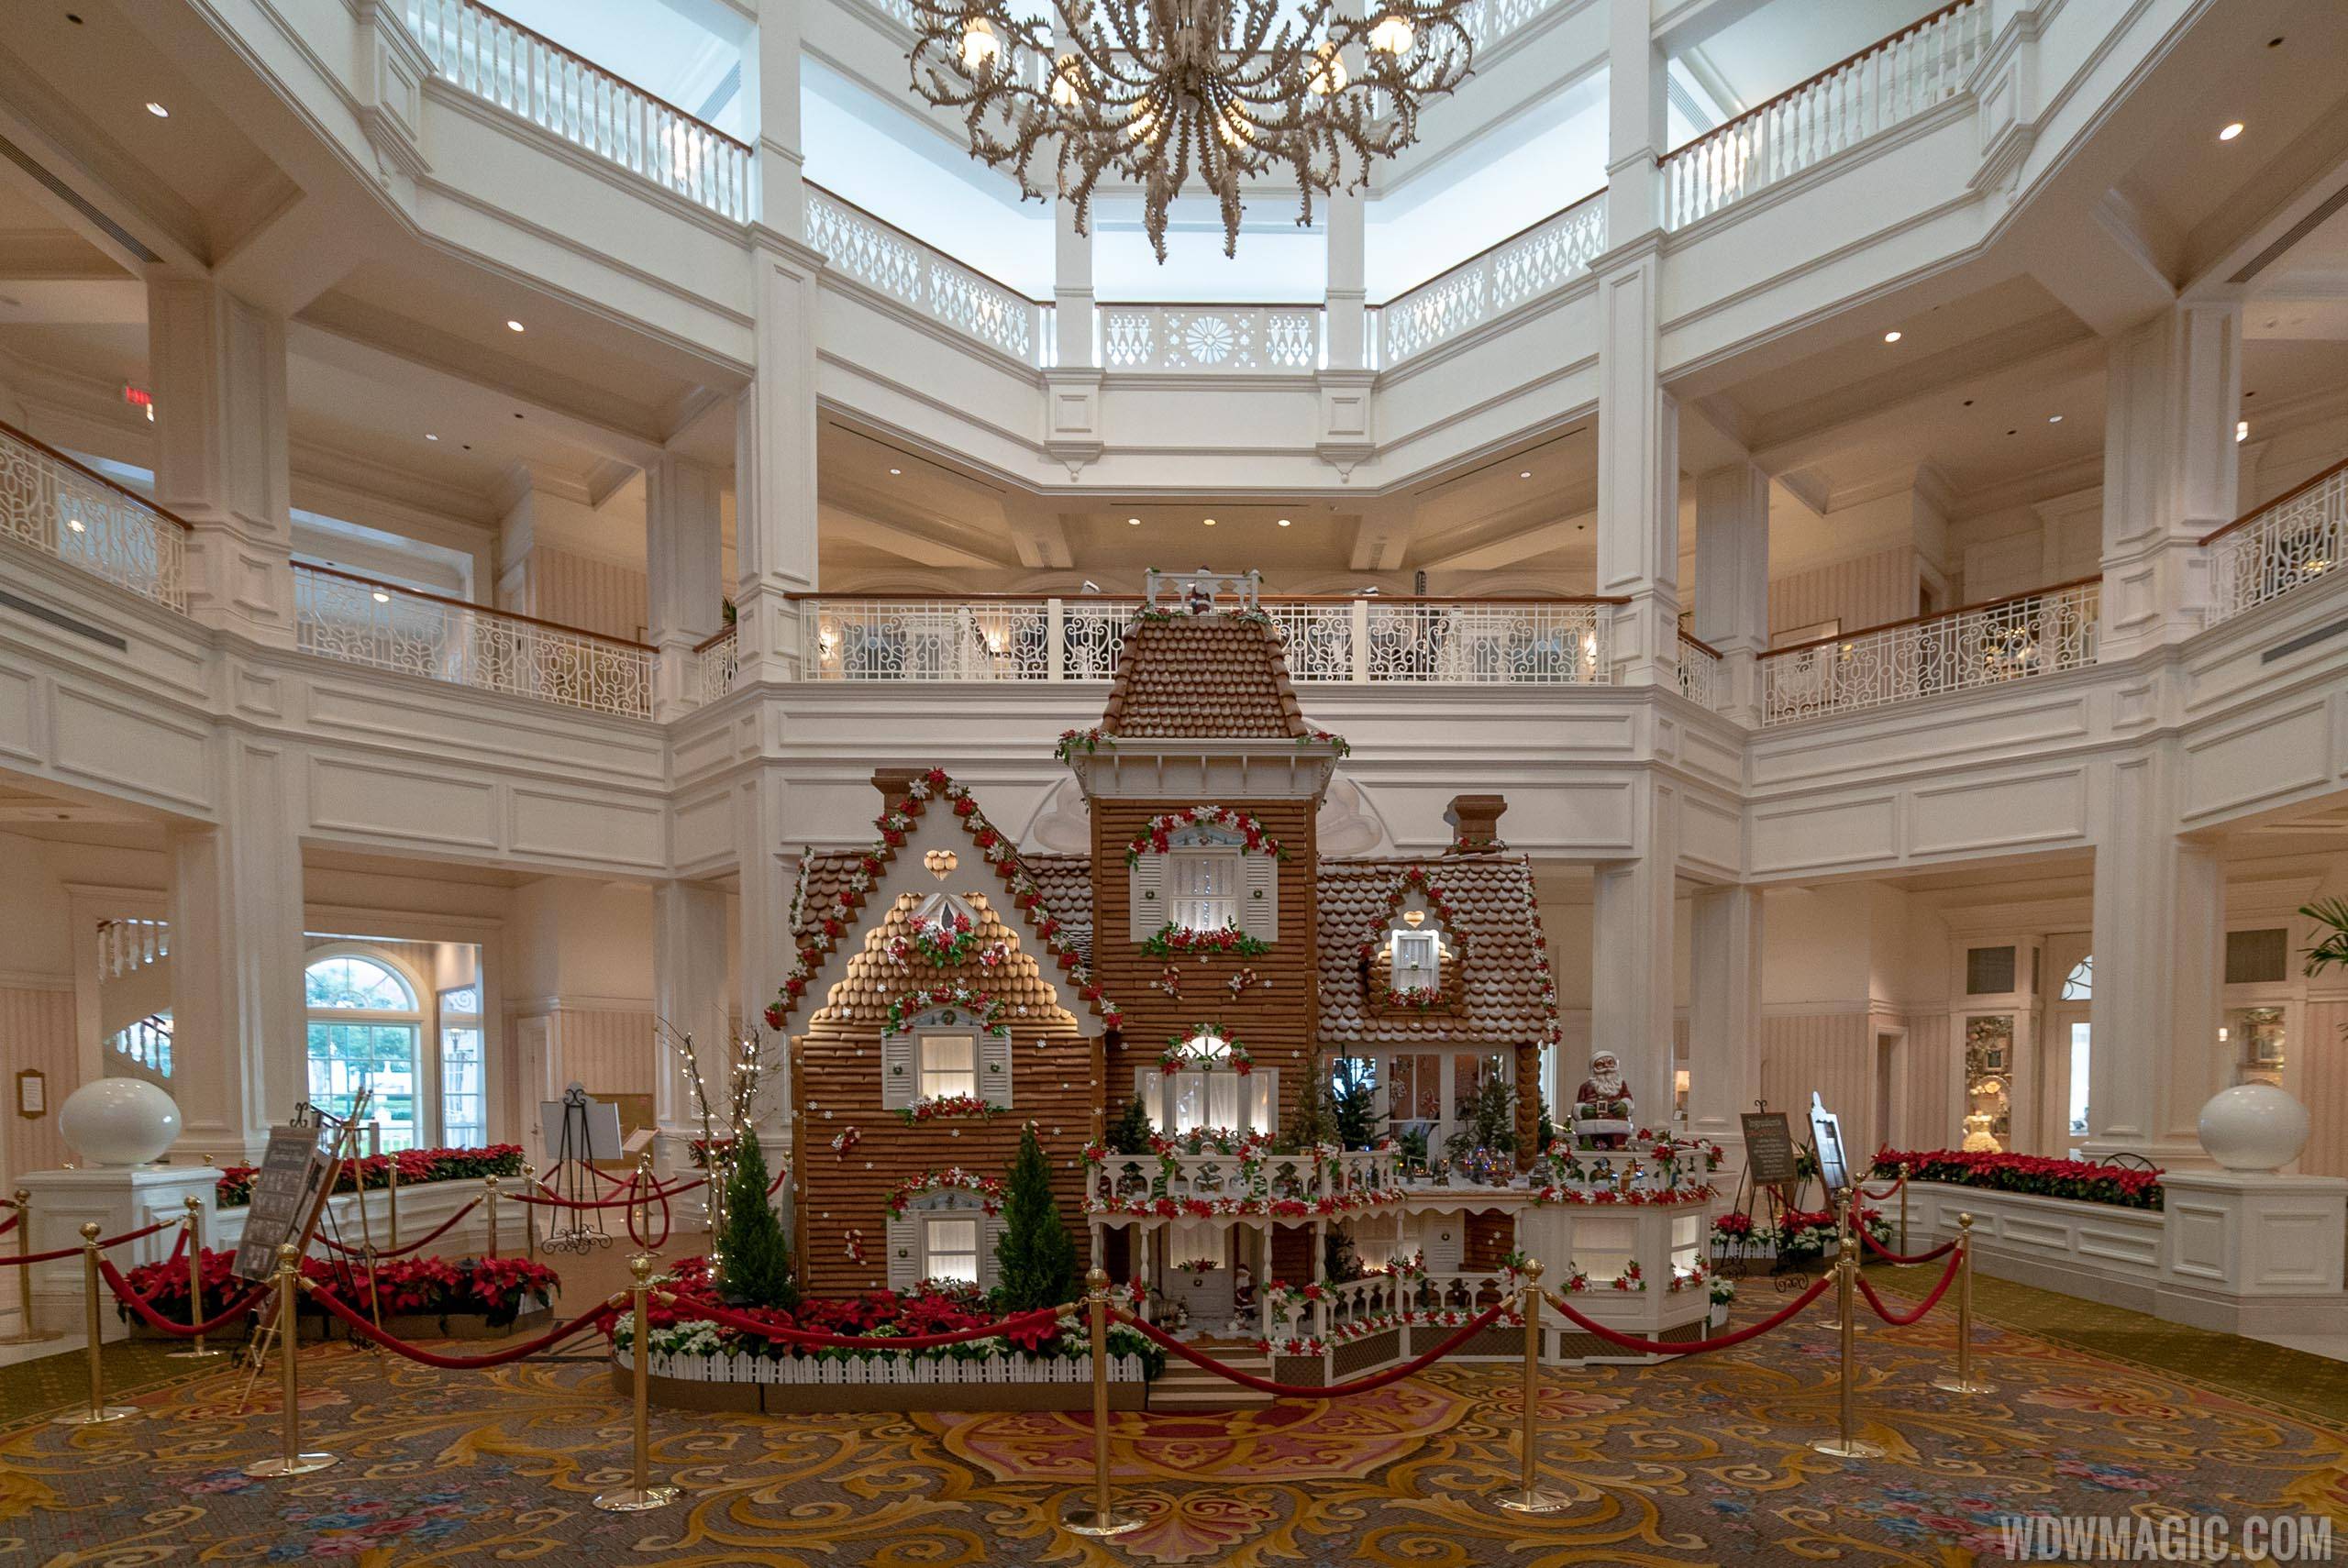 2018 Grand Floridian Gingerbread House